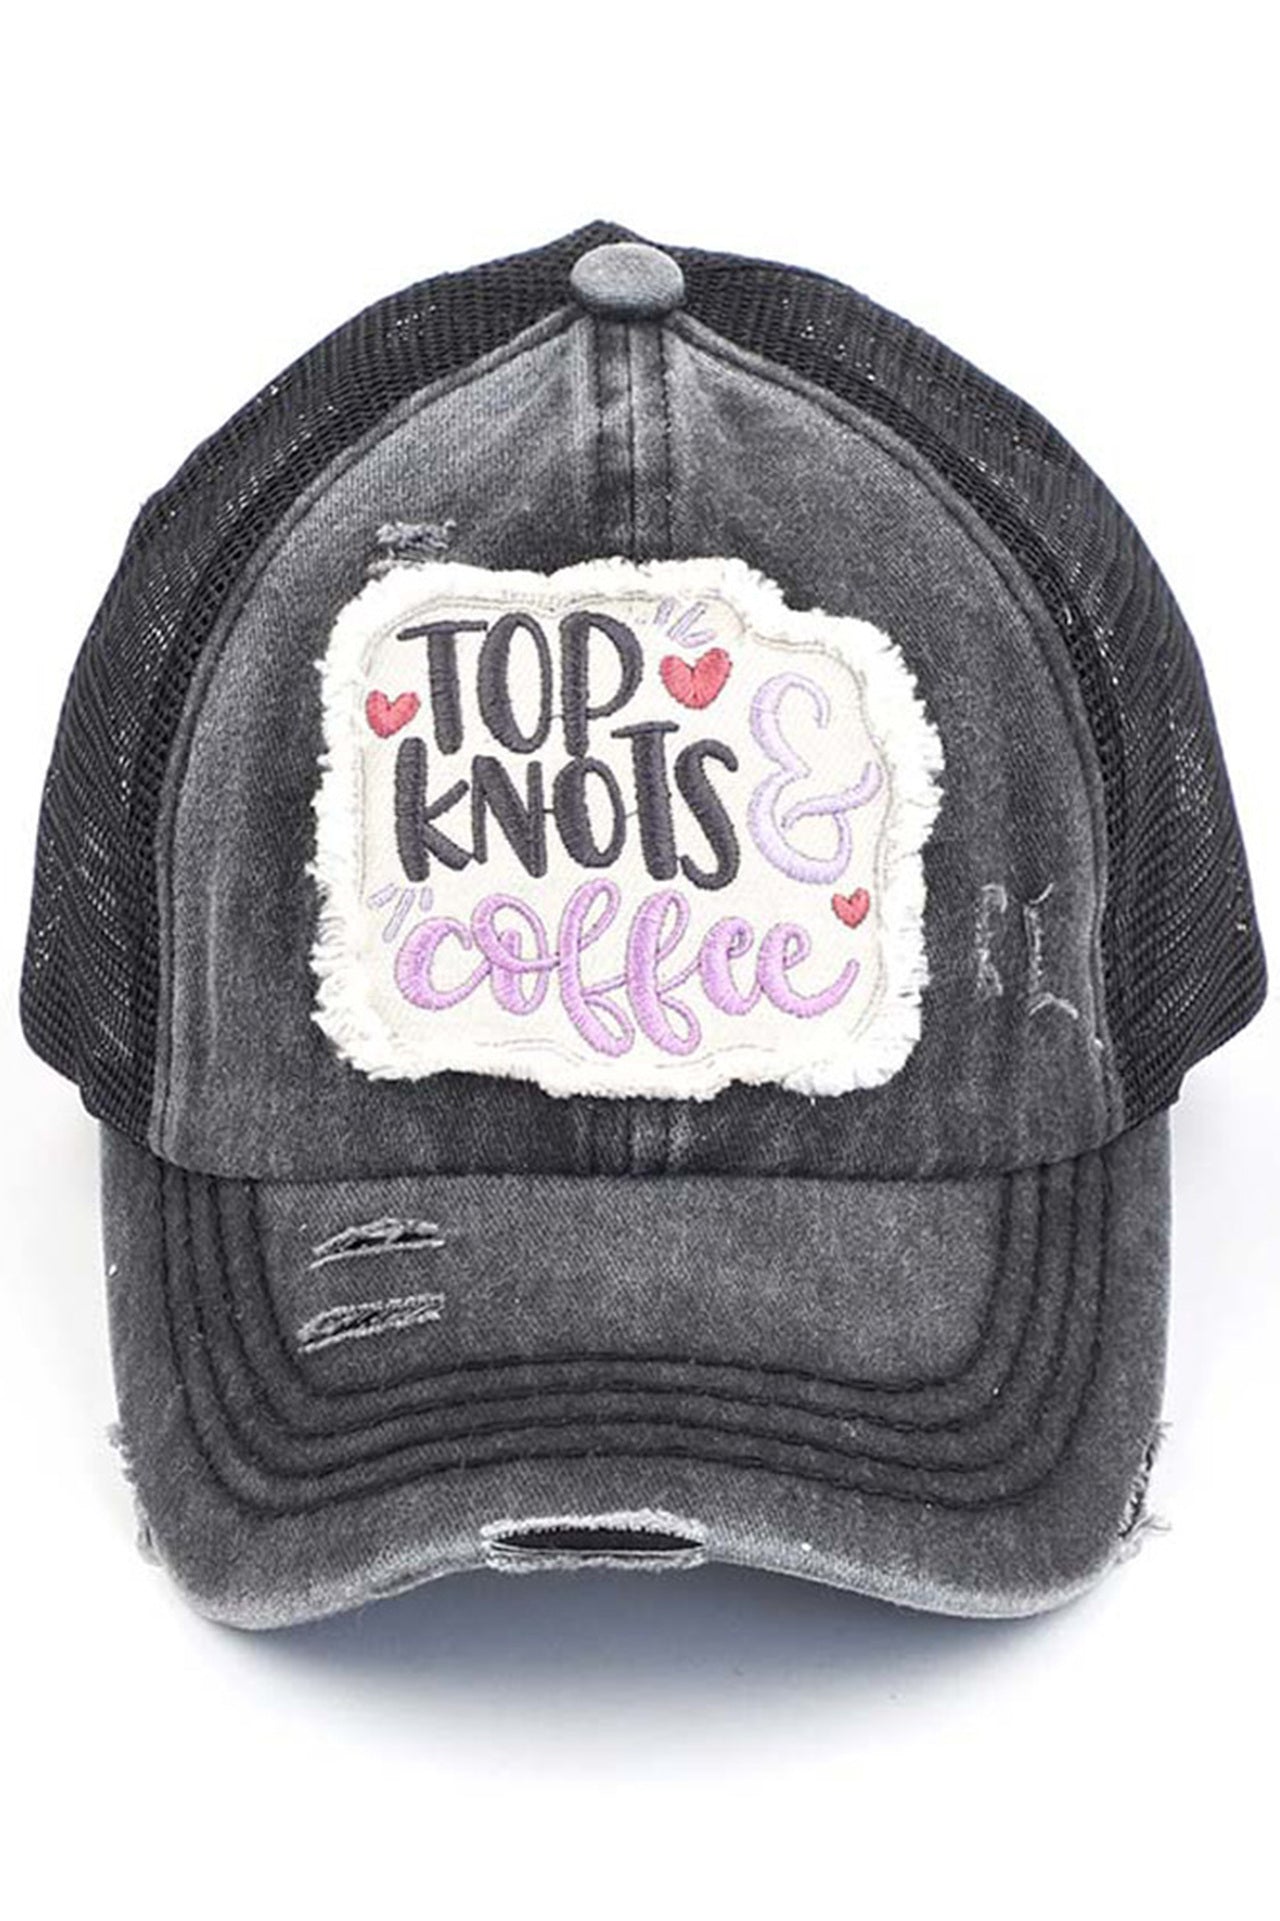 CC High Pony Criss Cross Ball Cap - Top Knots and Coffee Patch